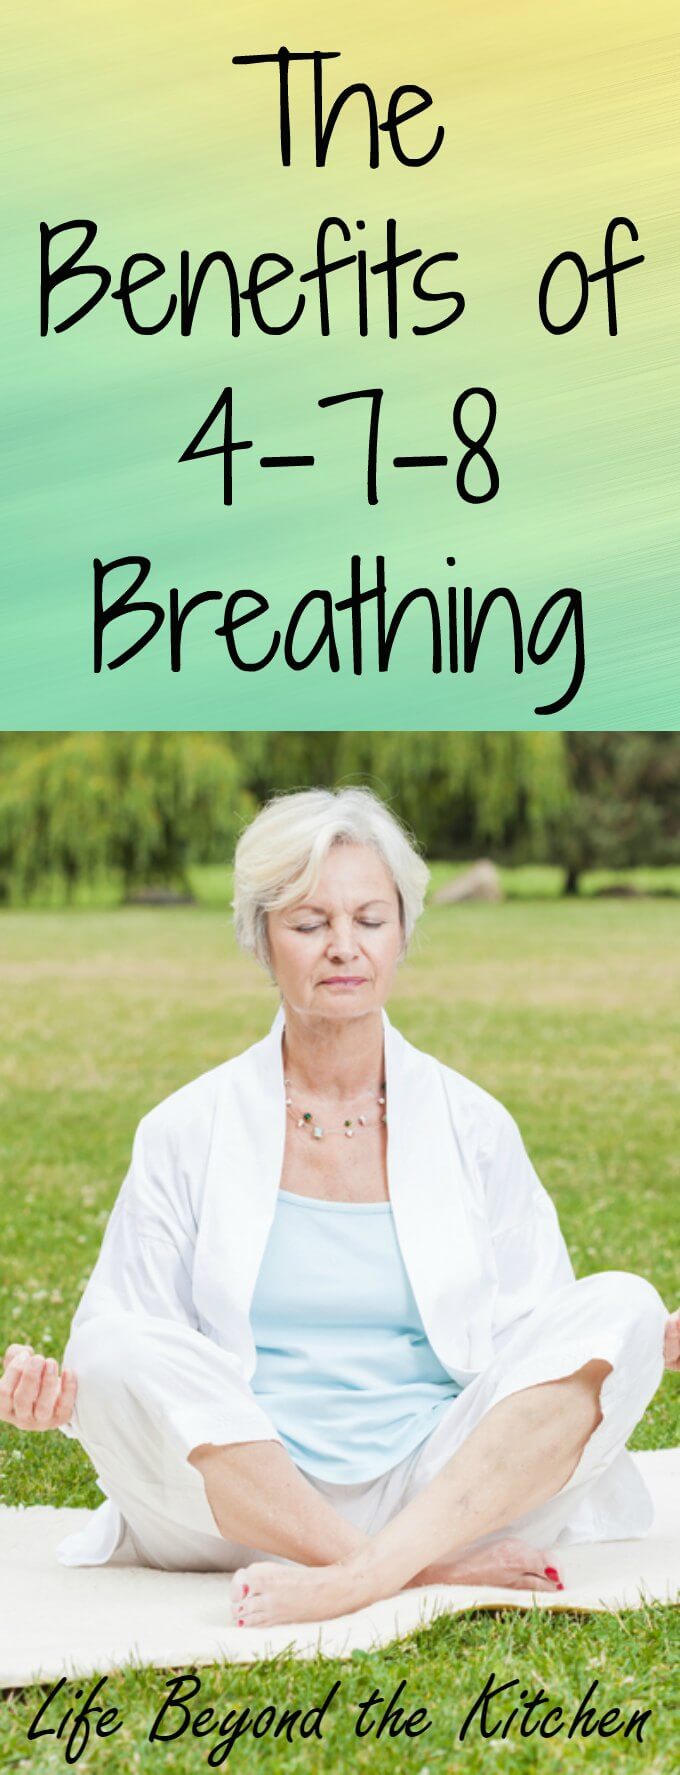 The Benefits of 4-7-8 Breathing ~ Life Beyond the Kitchen